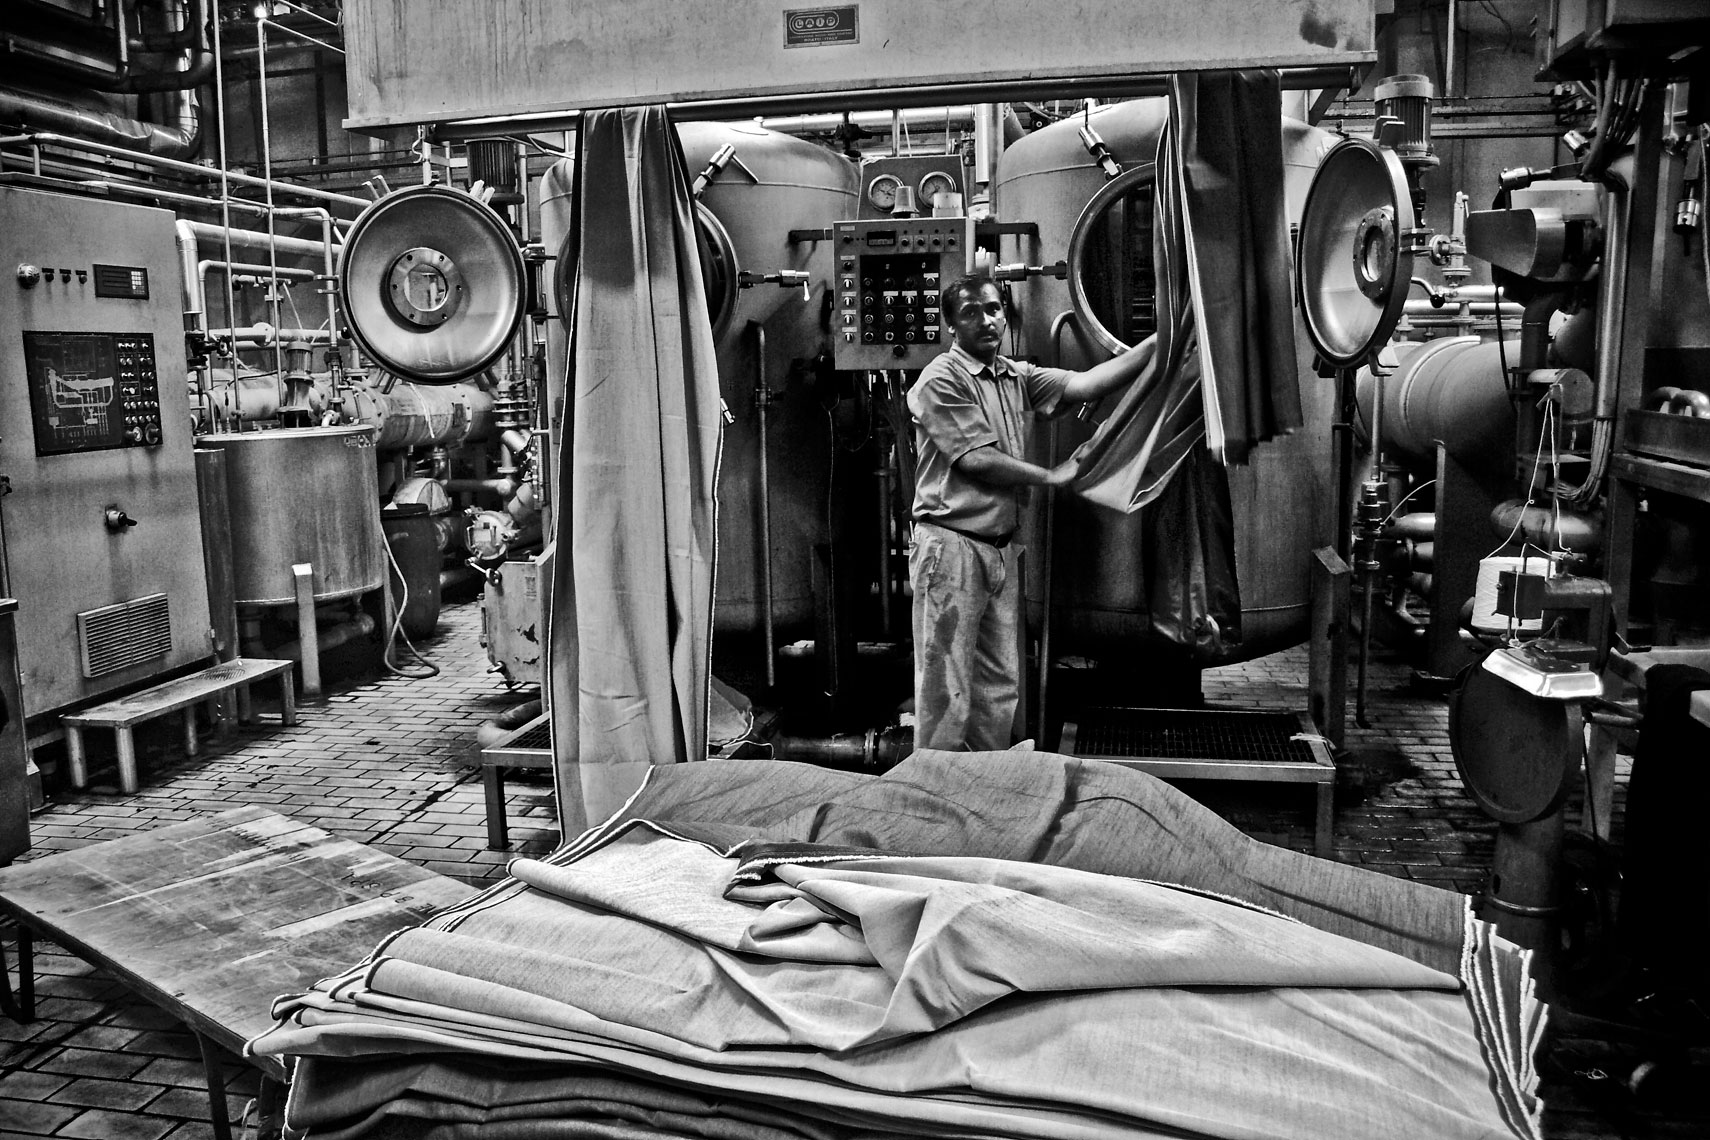 ITALY. Prato, 31st March 2009. Worker using dyeing machines.